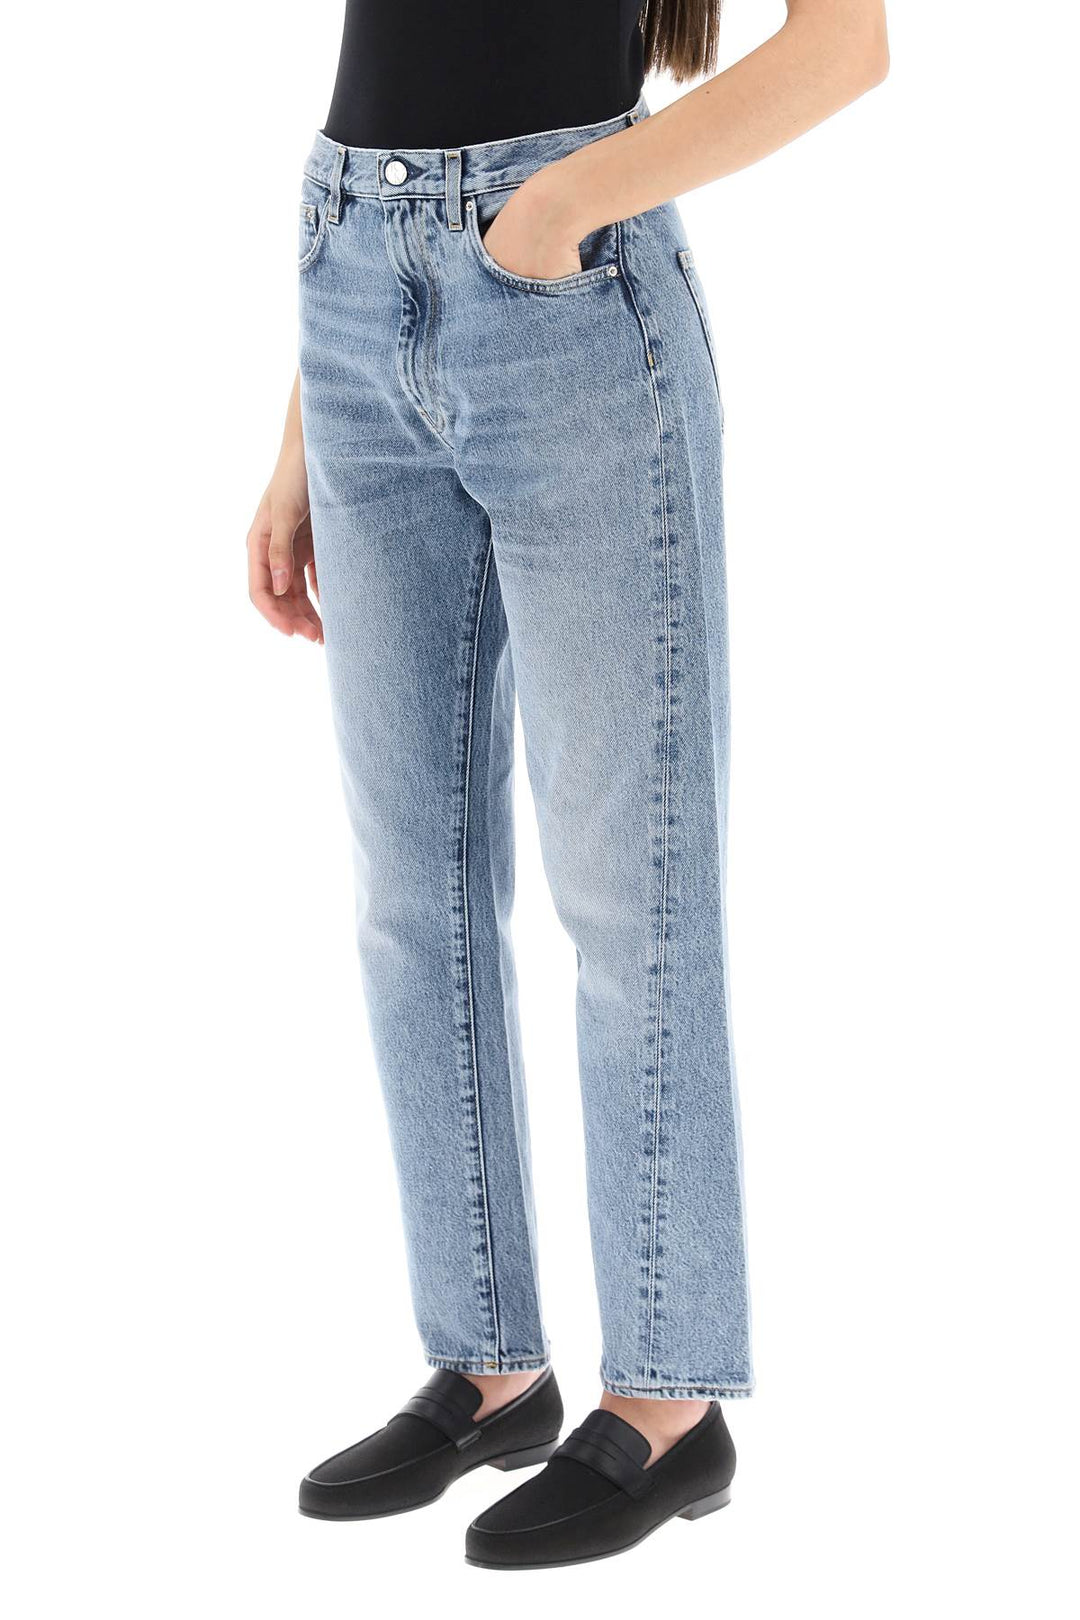 Toteme Twisted Seam Cropped Jeans   Blue